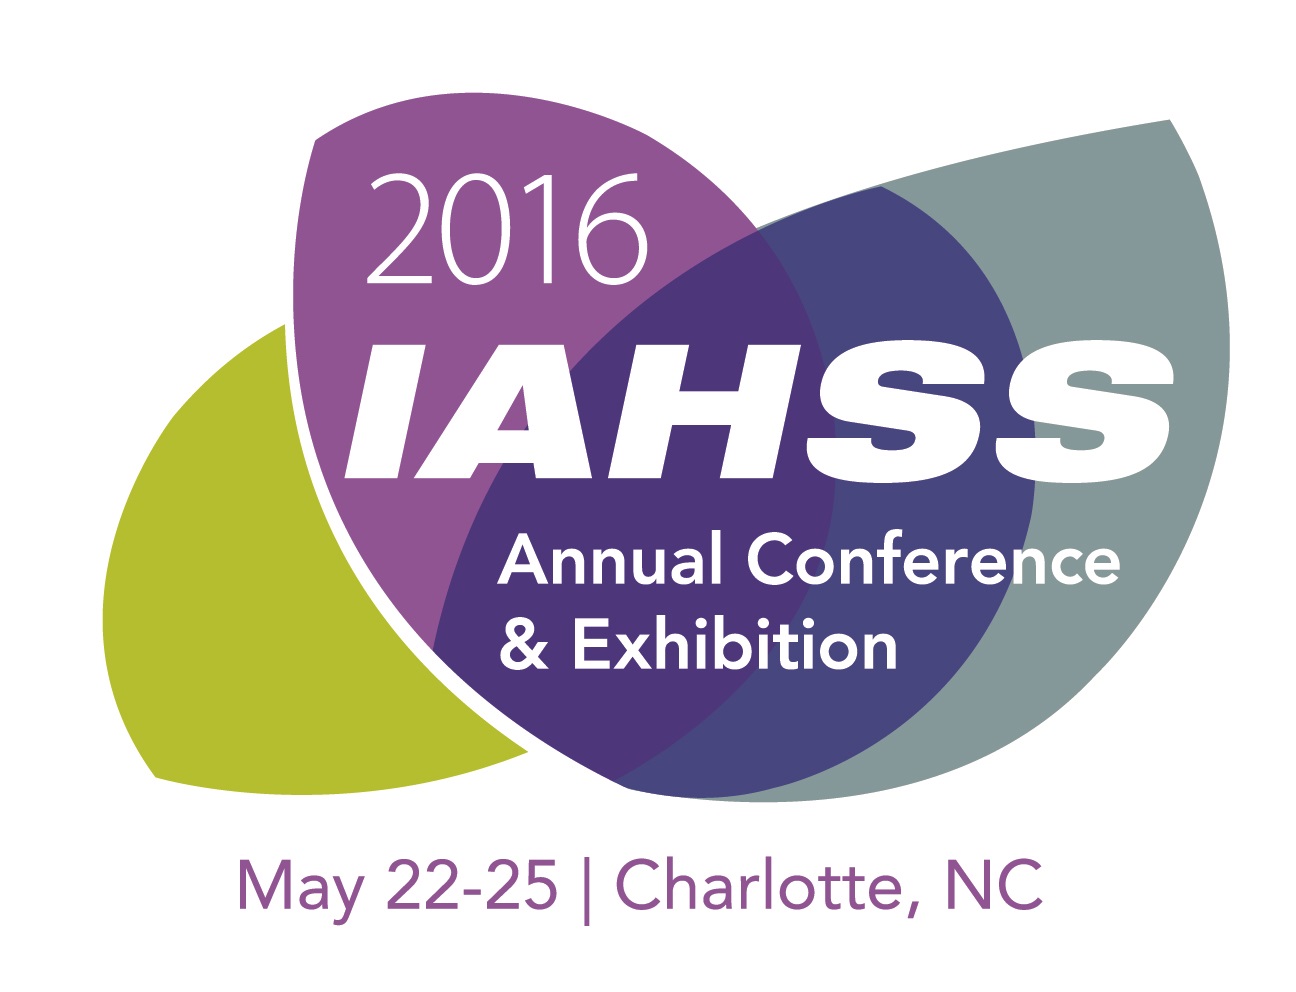  2016 IAHSS Annual Conference and Exhibition